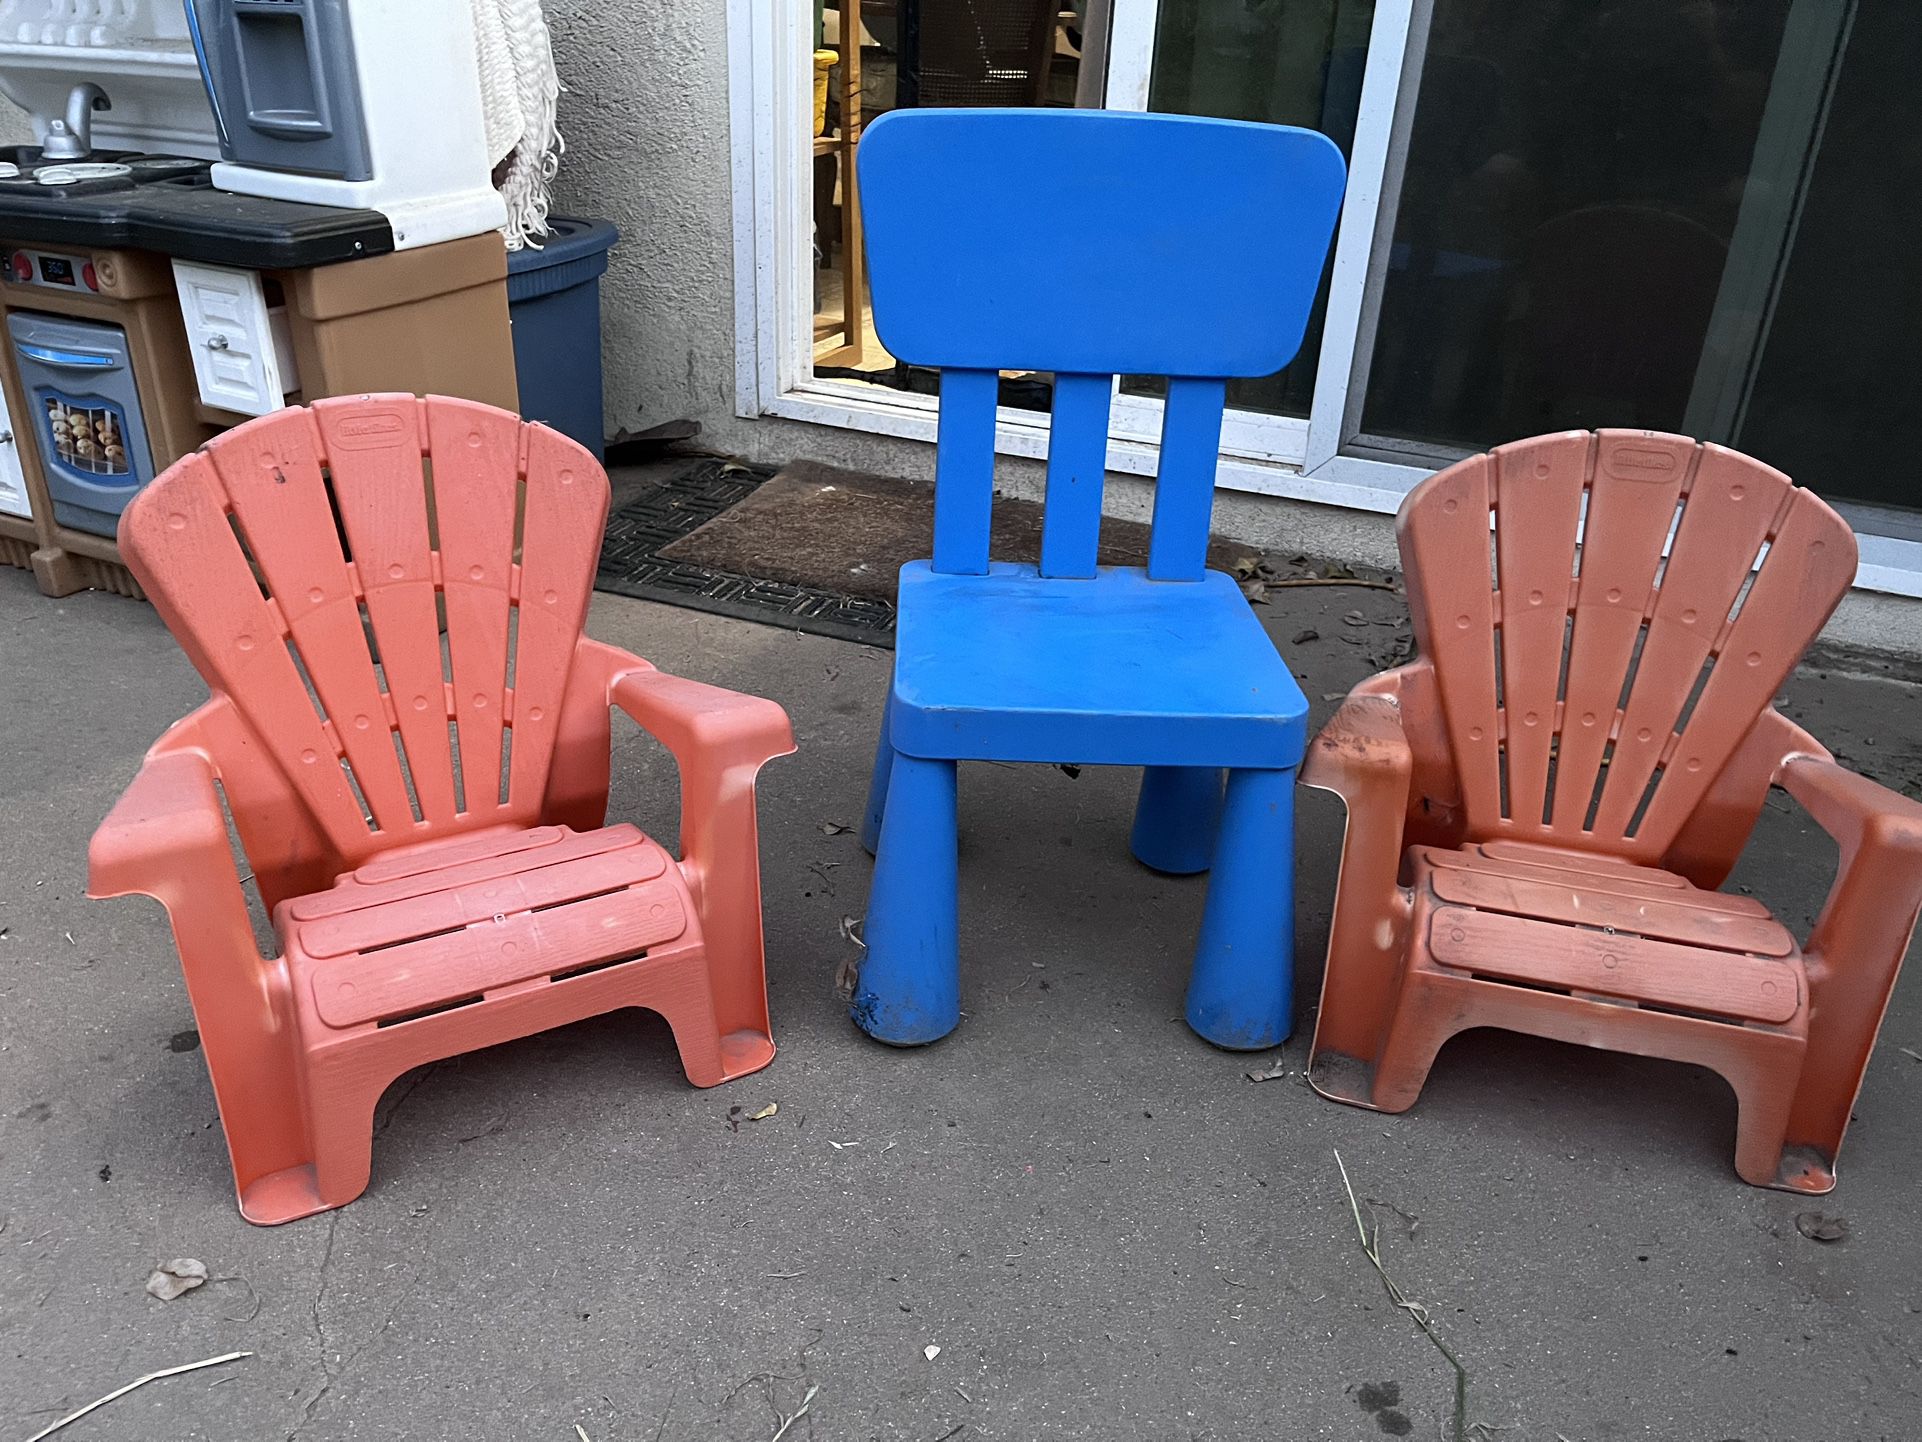 3 Toddler Chairs - $15